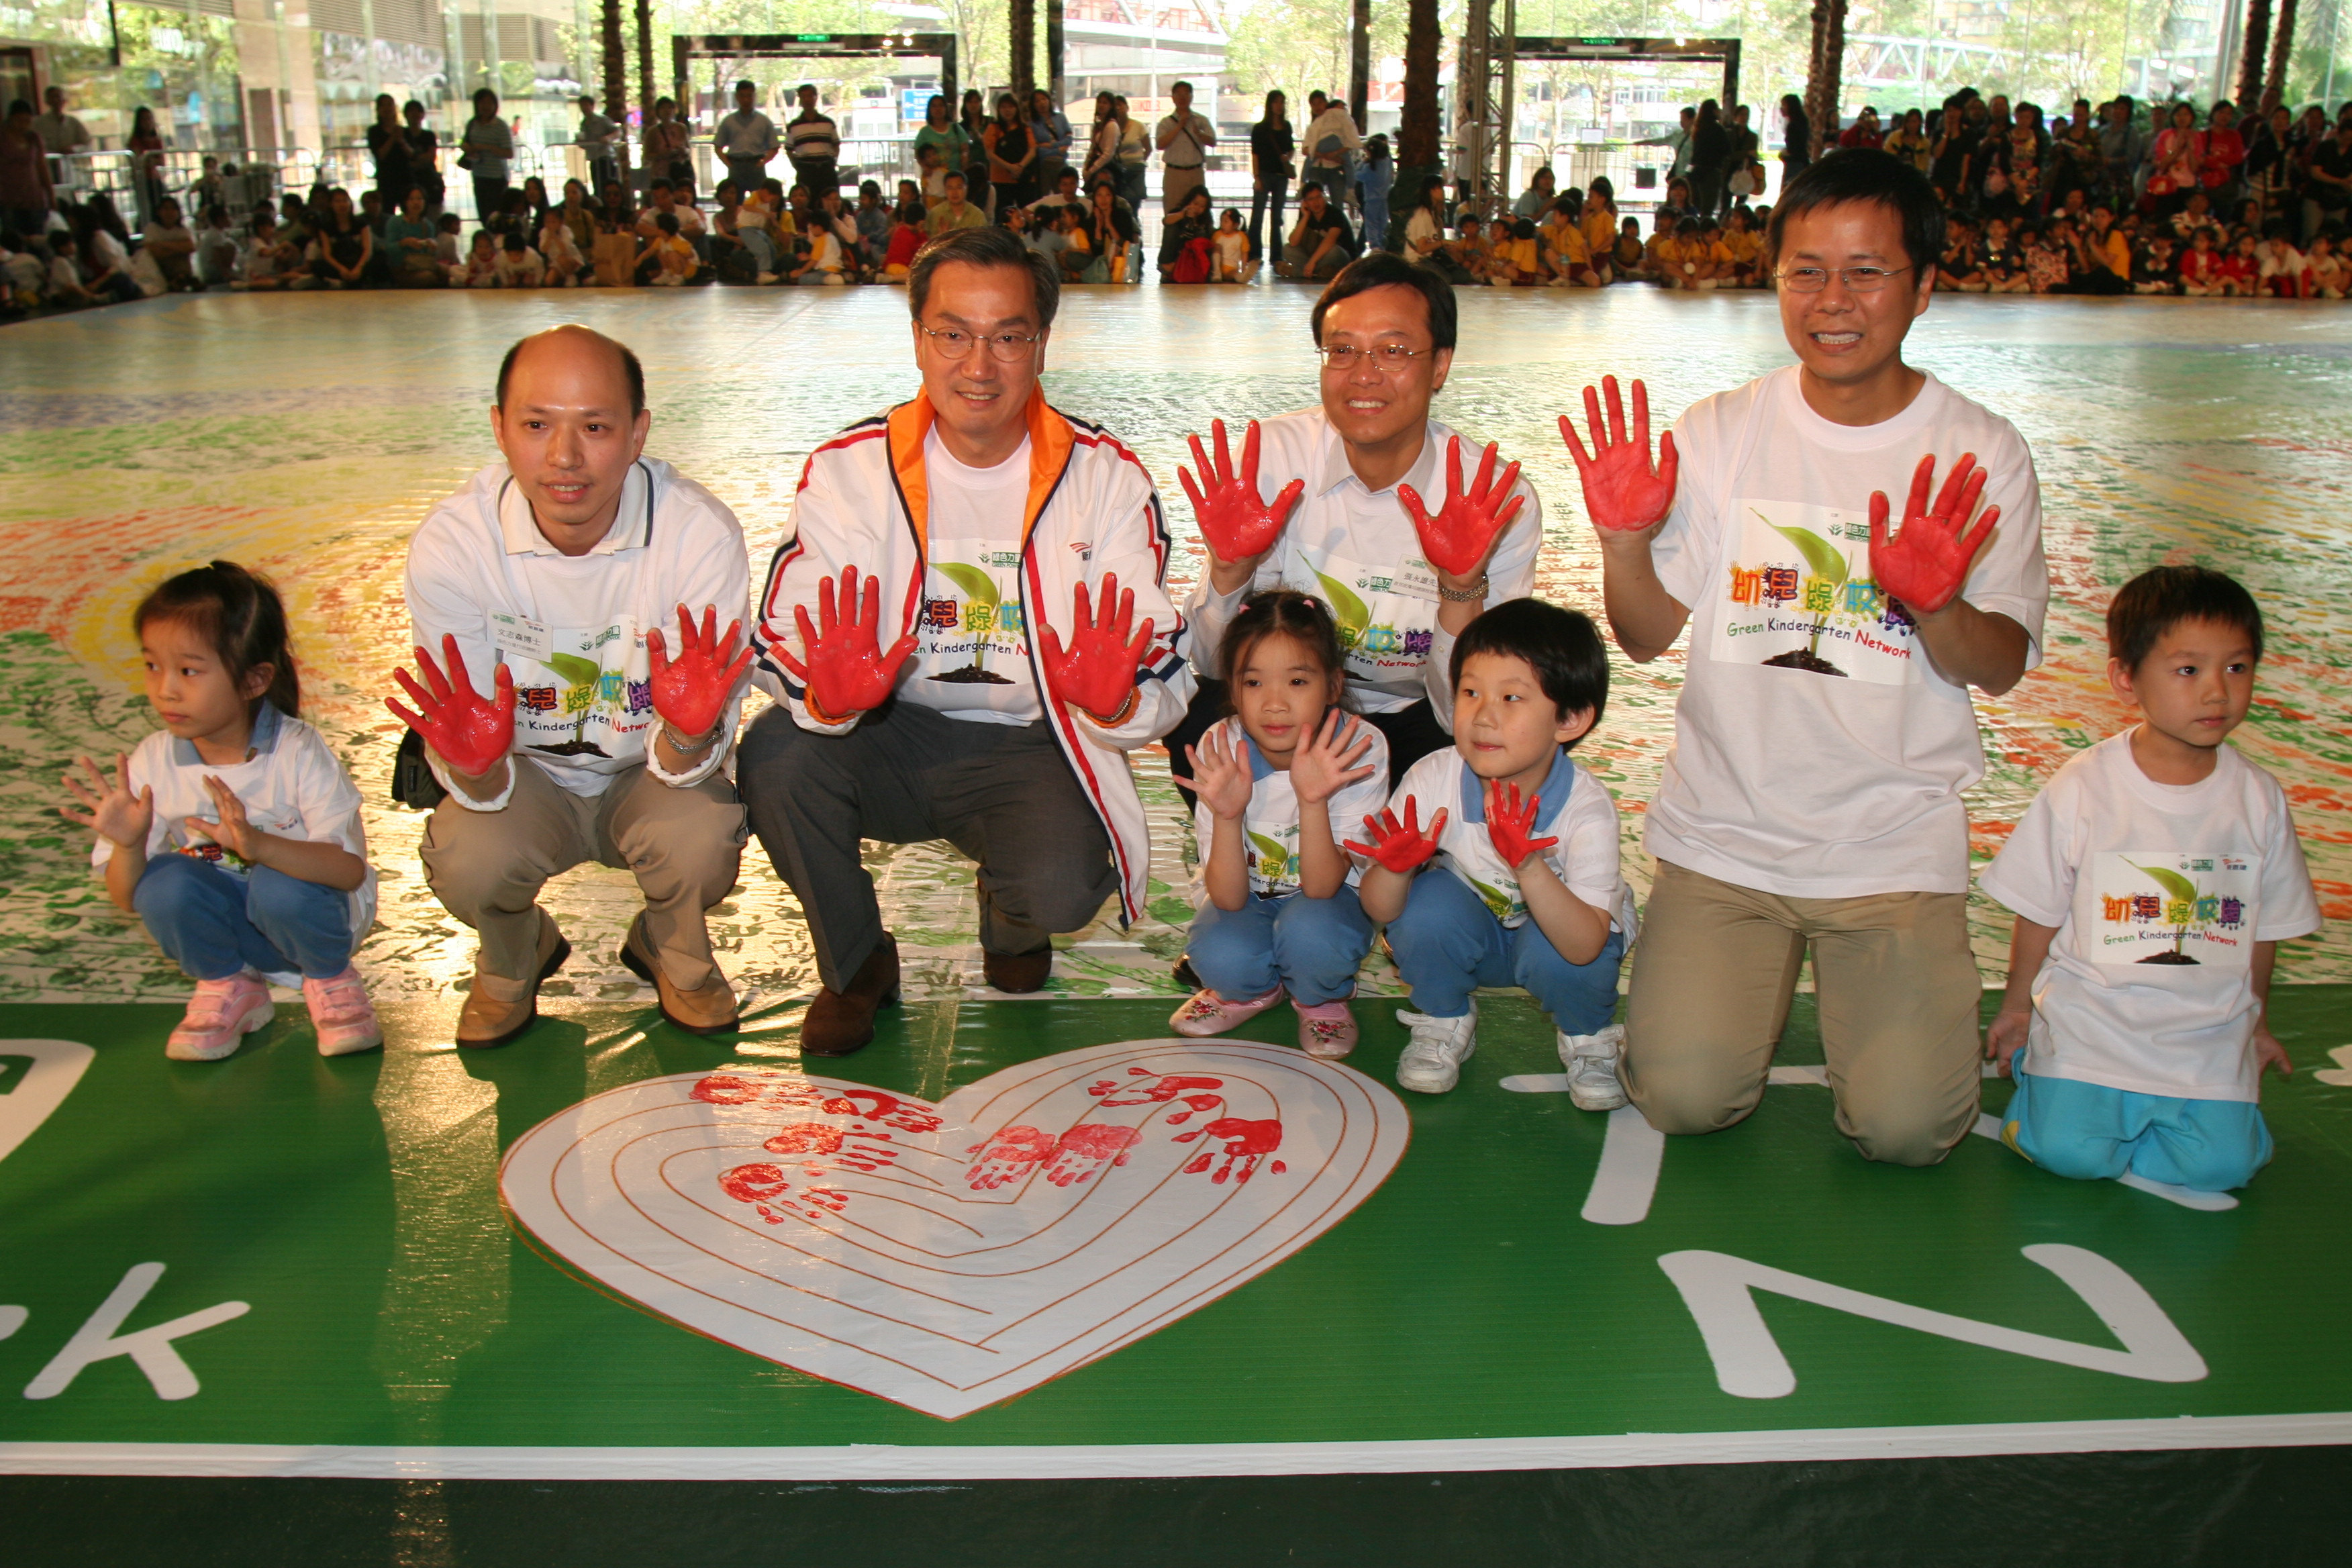 Green Kindergarten Network kicked off <BR>with world-record-breaking handprint painting by 3,000 children